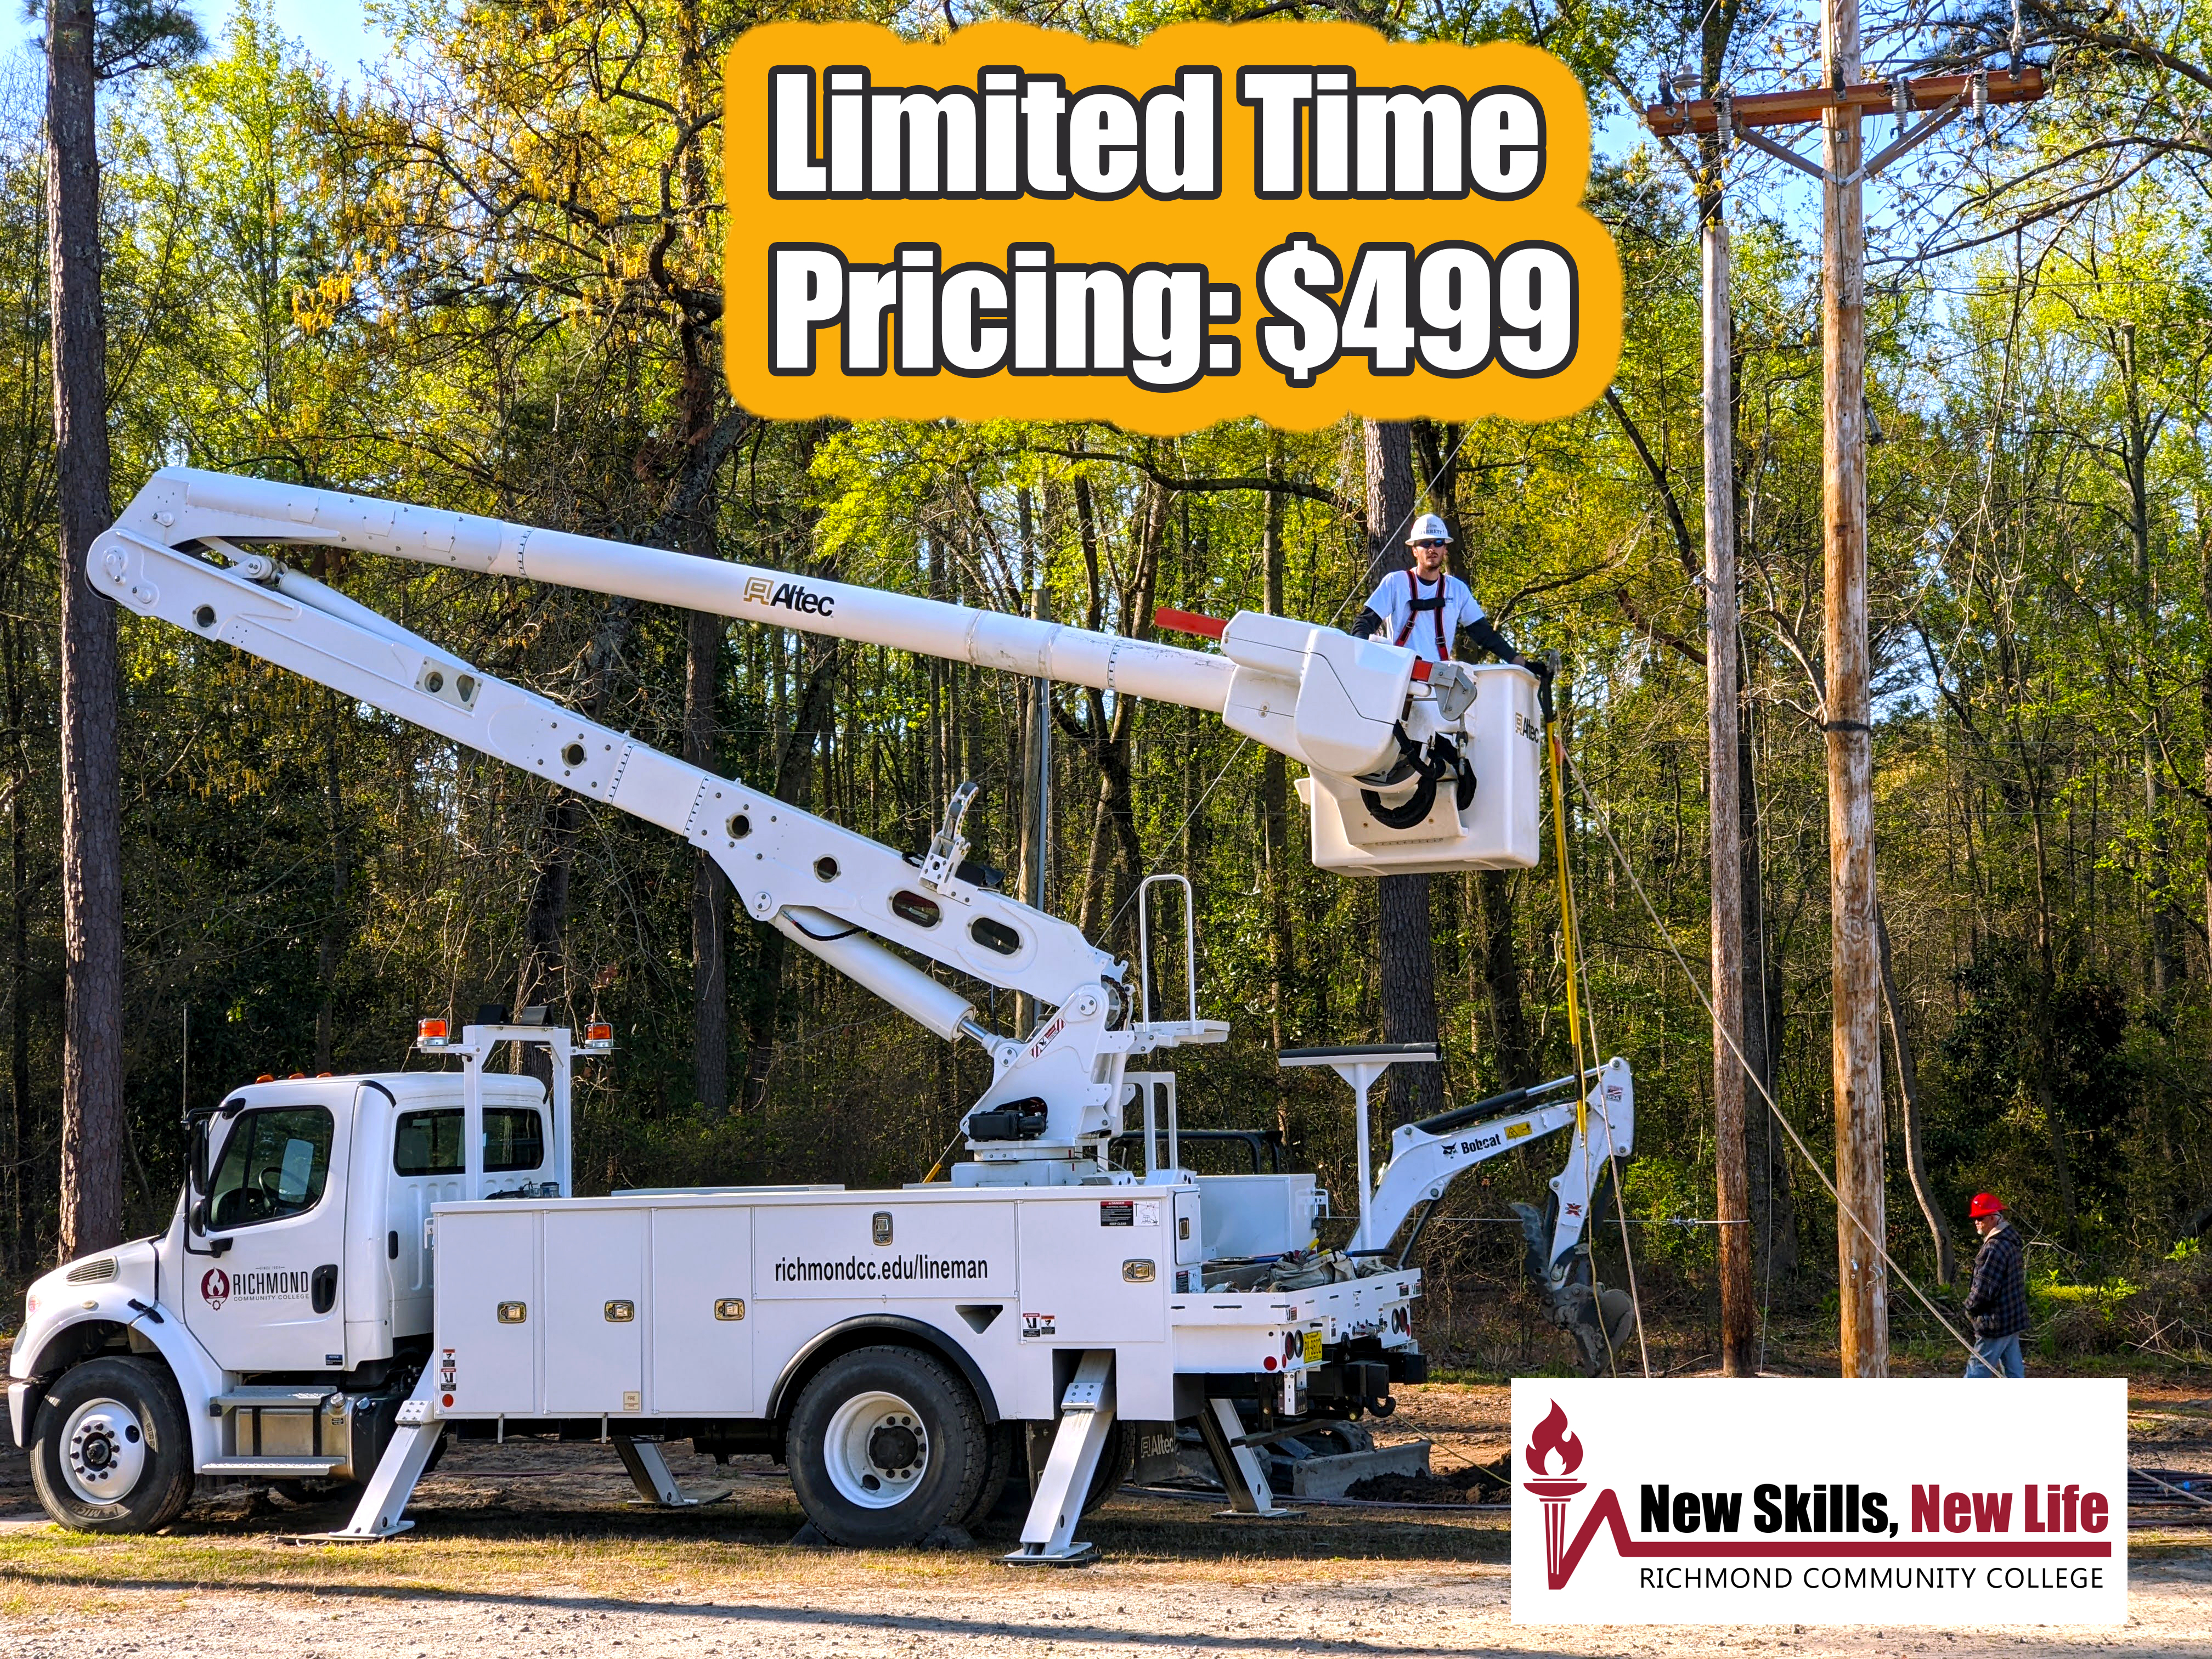 Electric Lineman Limited Tim Pricing: $499 with photo of lineman in bucket truck